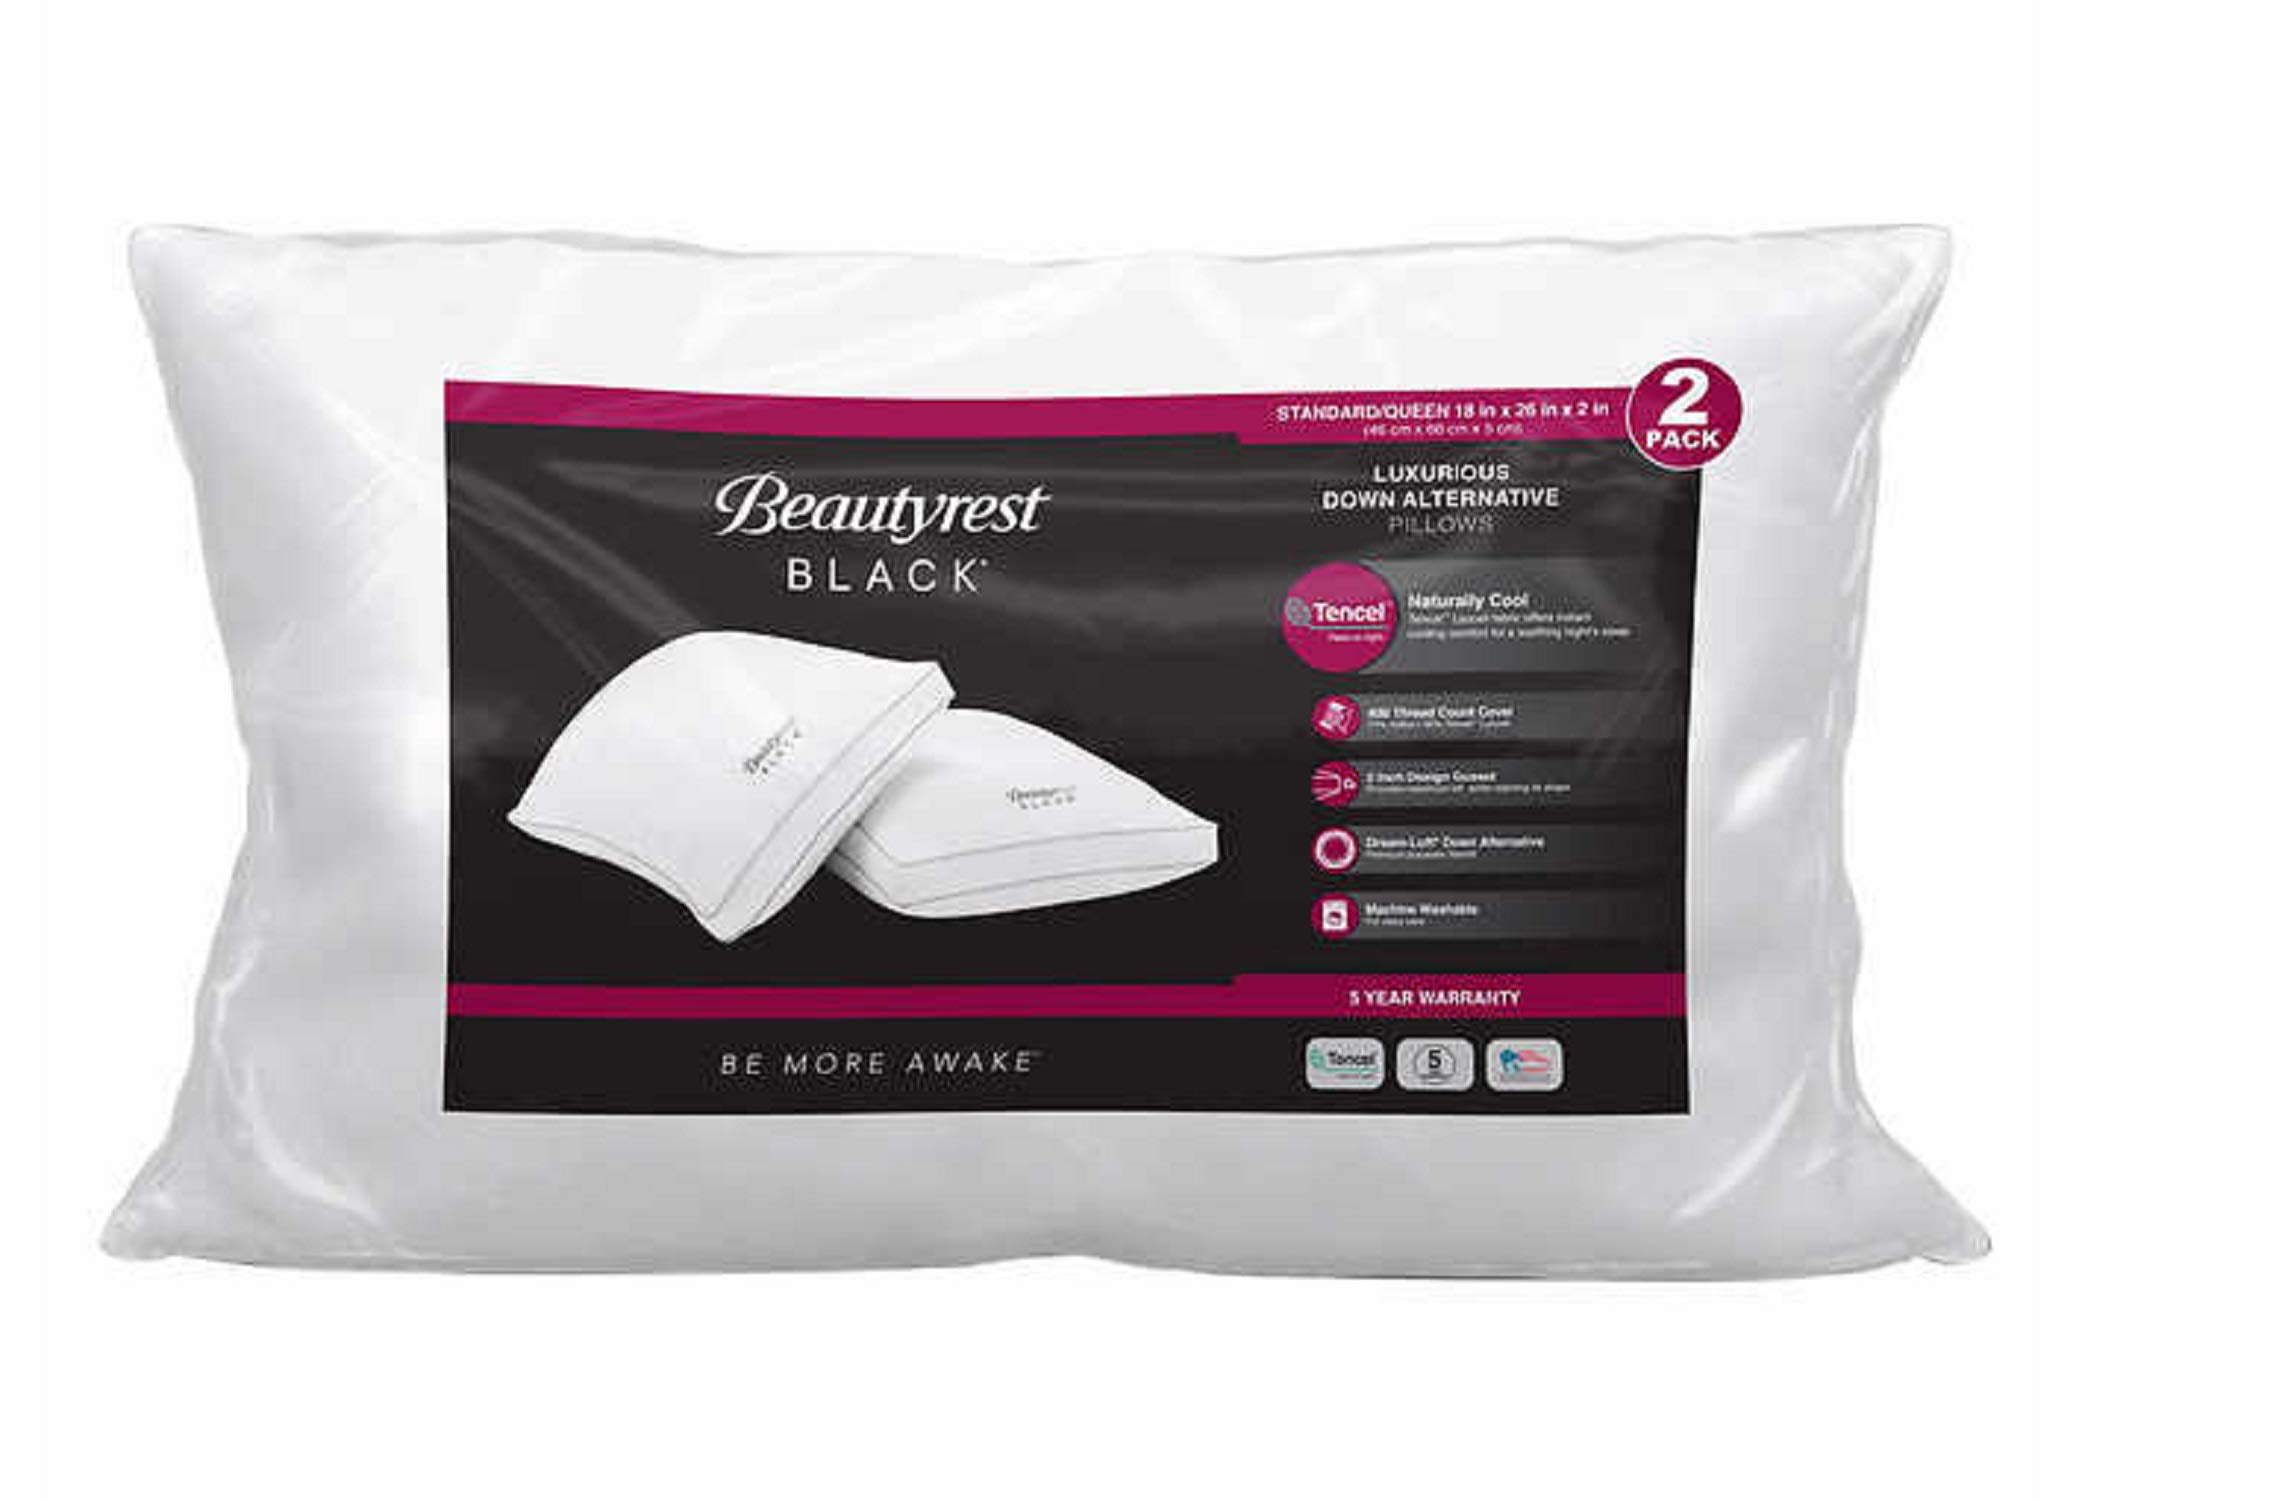 Standard Size Bed Pillows for Sleeping 2 Pack,Down Alternative Cooling Pillows Set of 2 